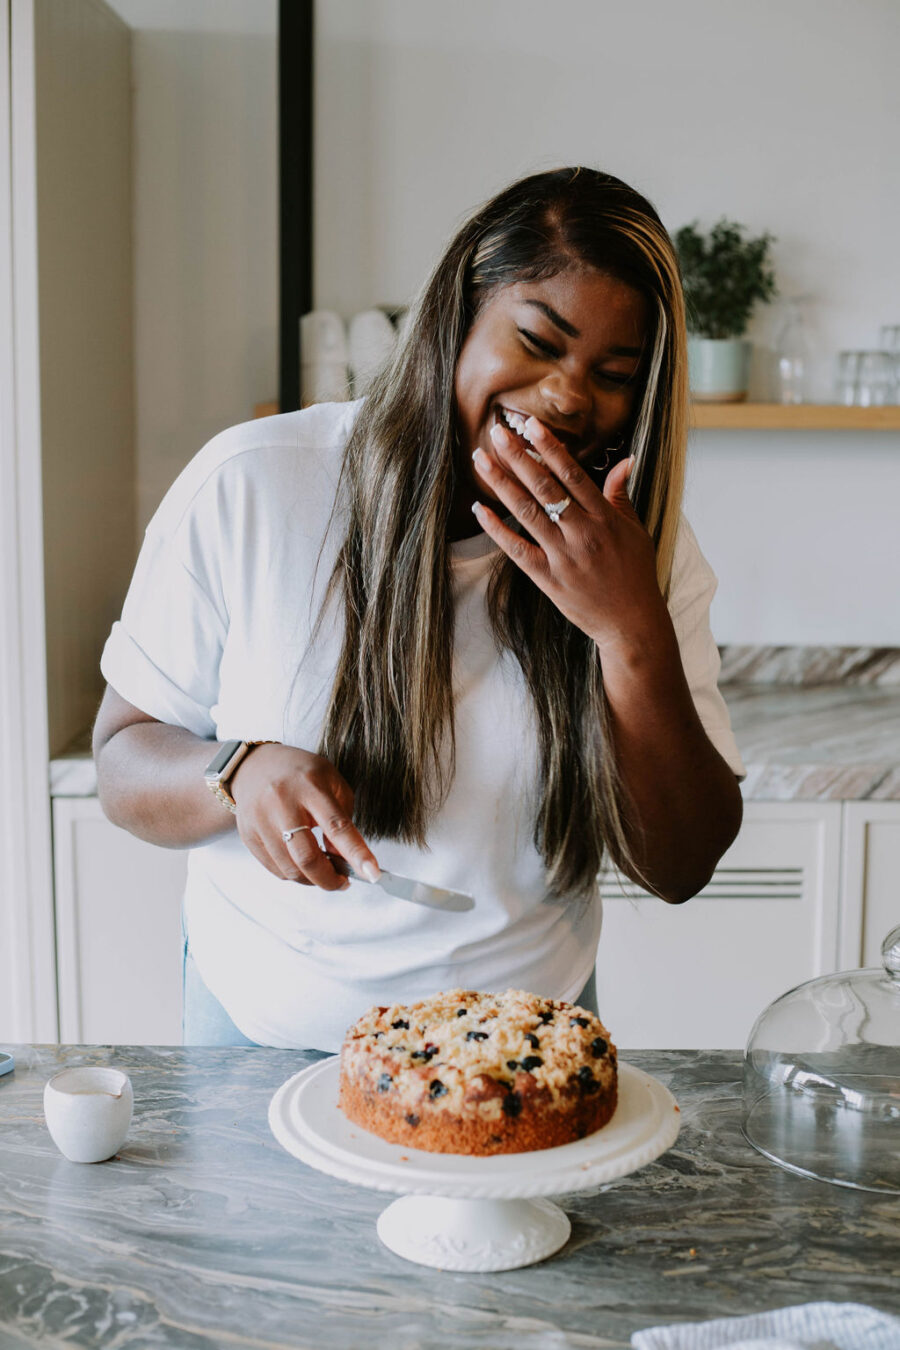 Remi laughing as she cuts into a blueberry cake on white cake stand. Shot in a neutral coloured kitchen with marble tops.